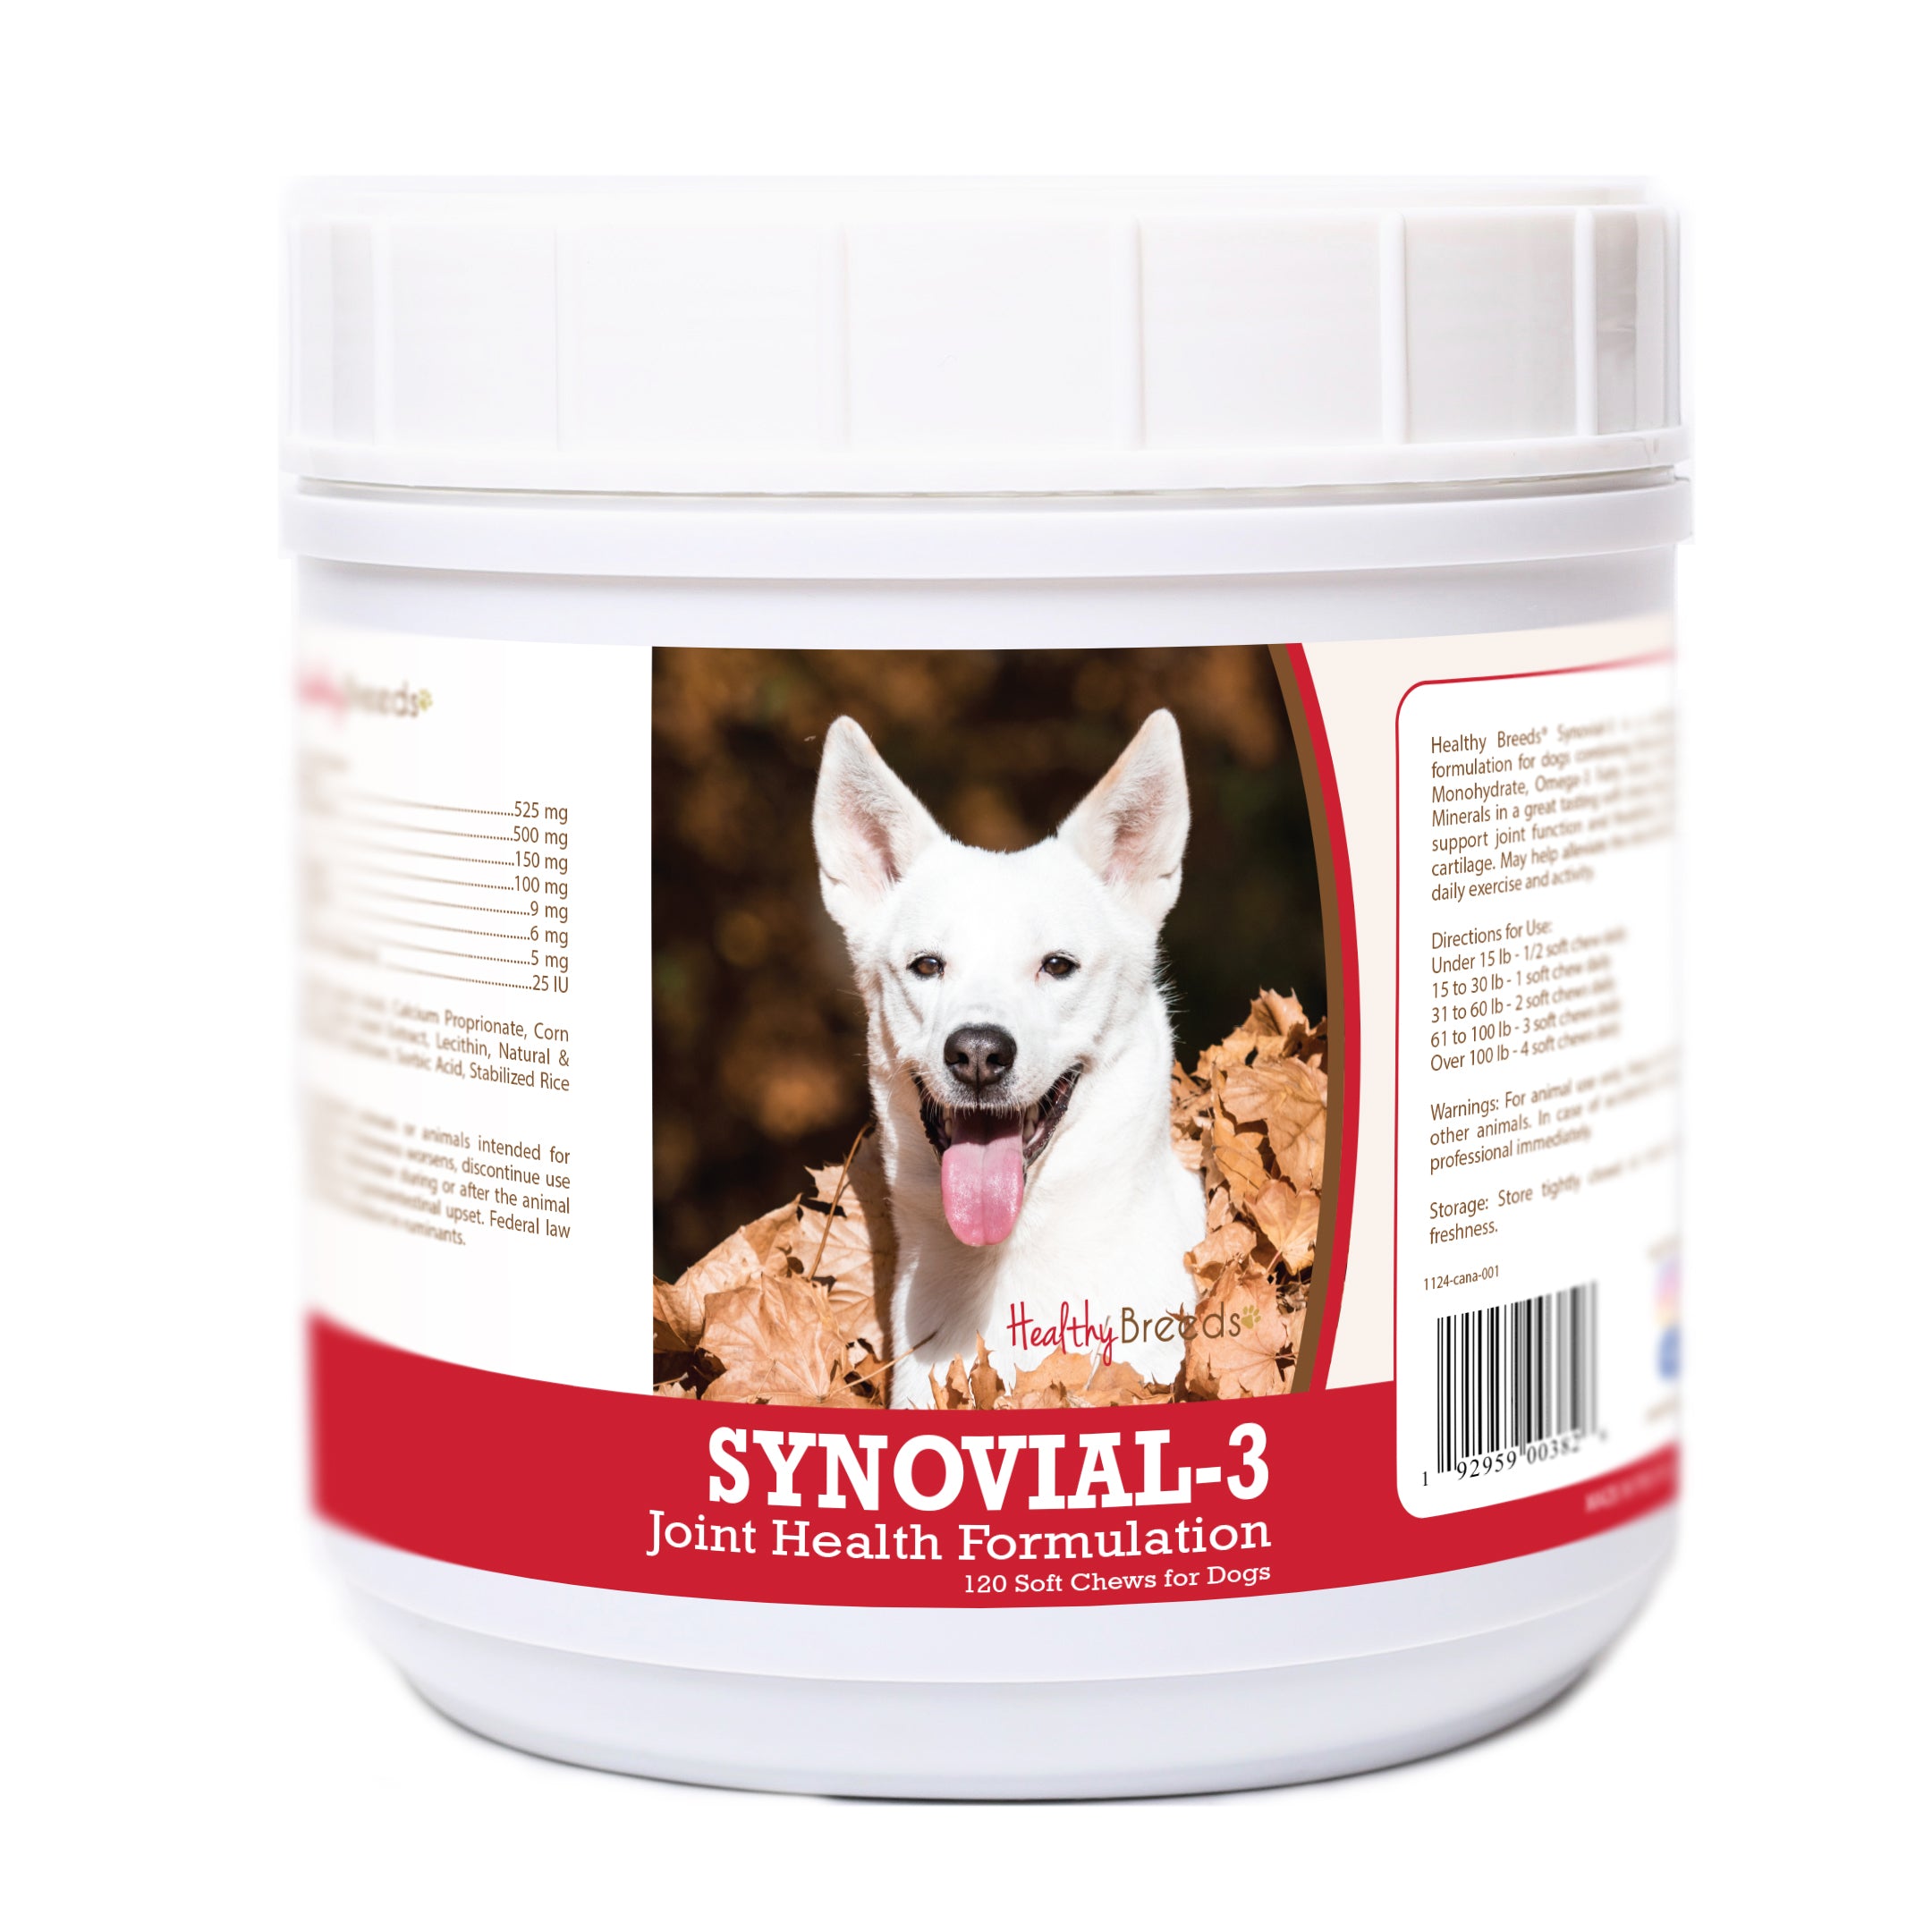 Canaan Dog Synovial-3 Joint Health Formulation Soft Chews 120 Count